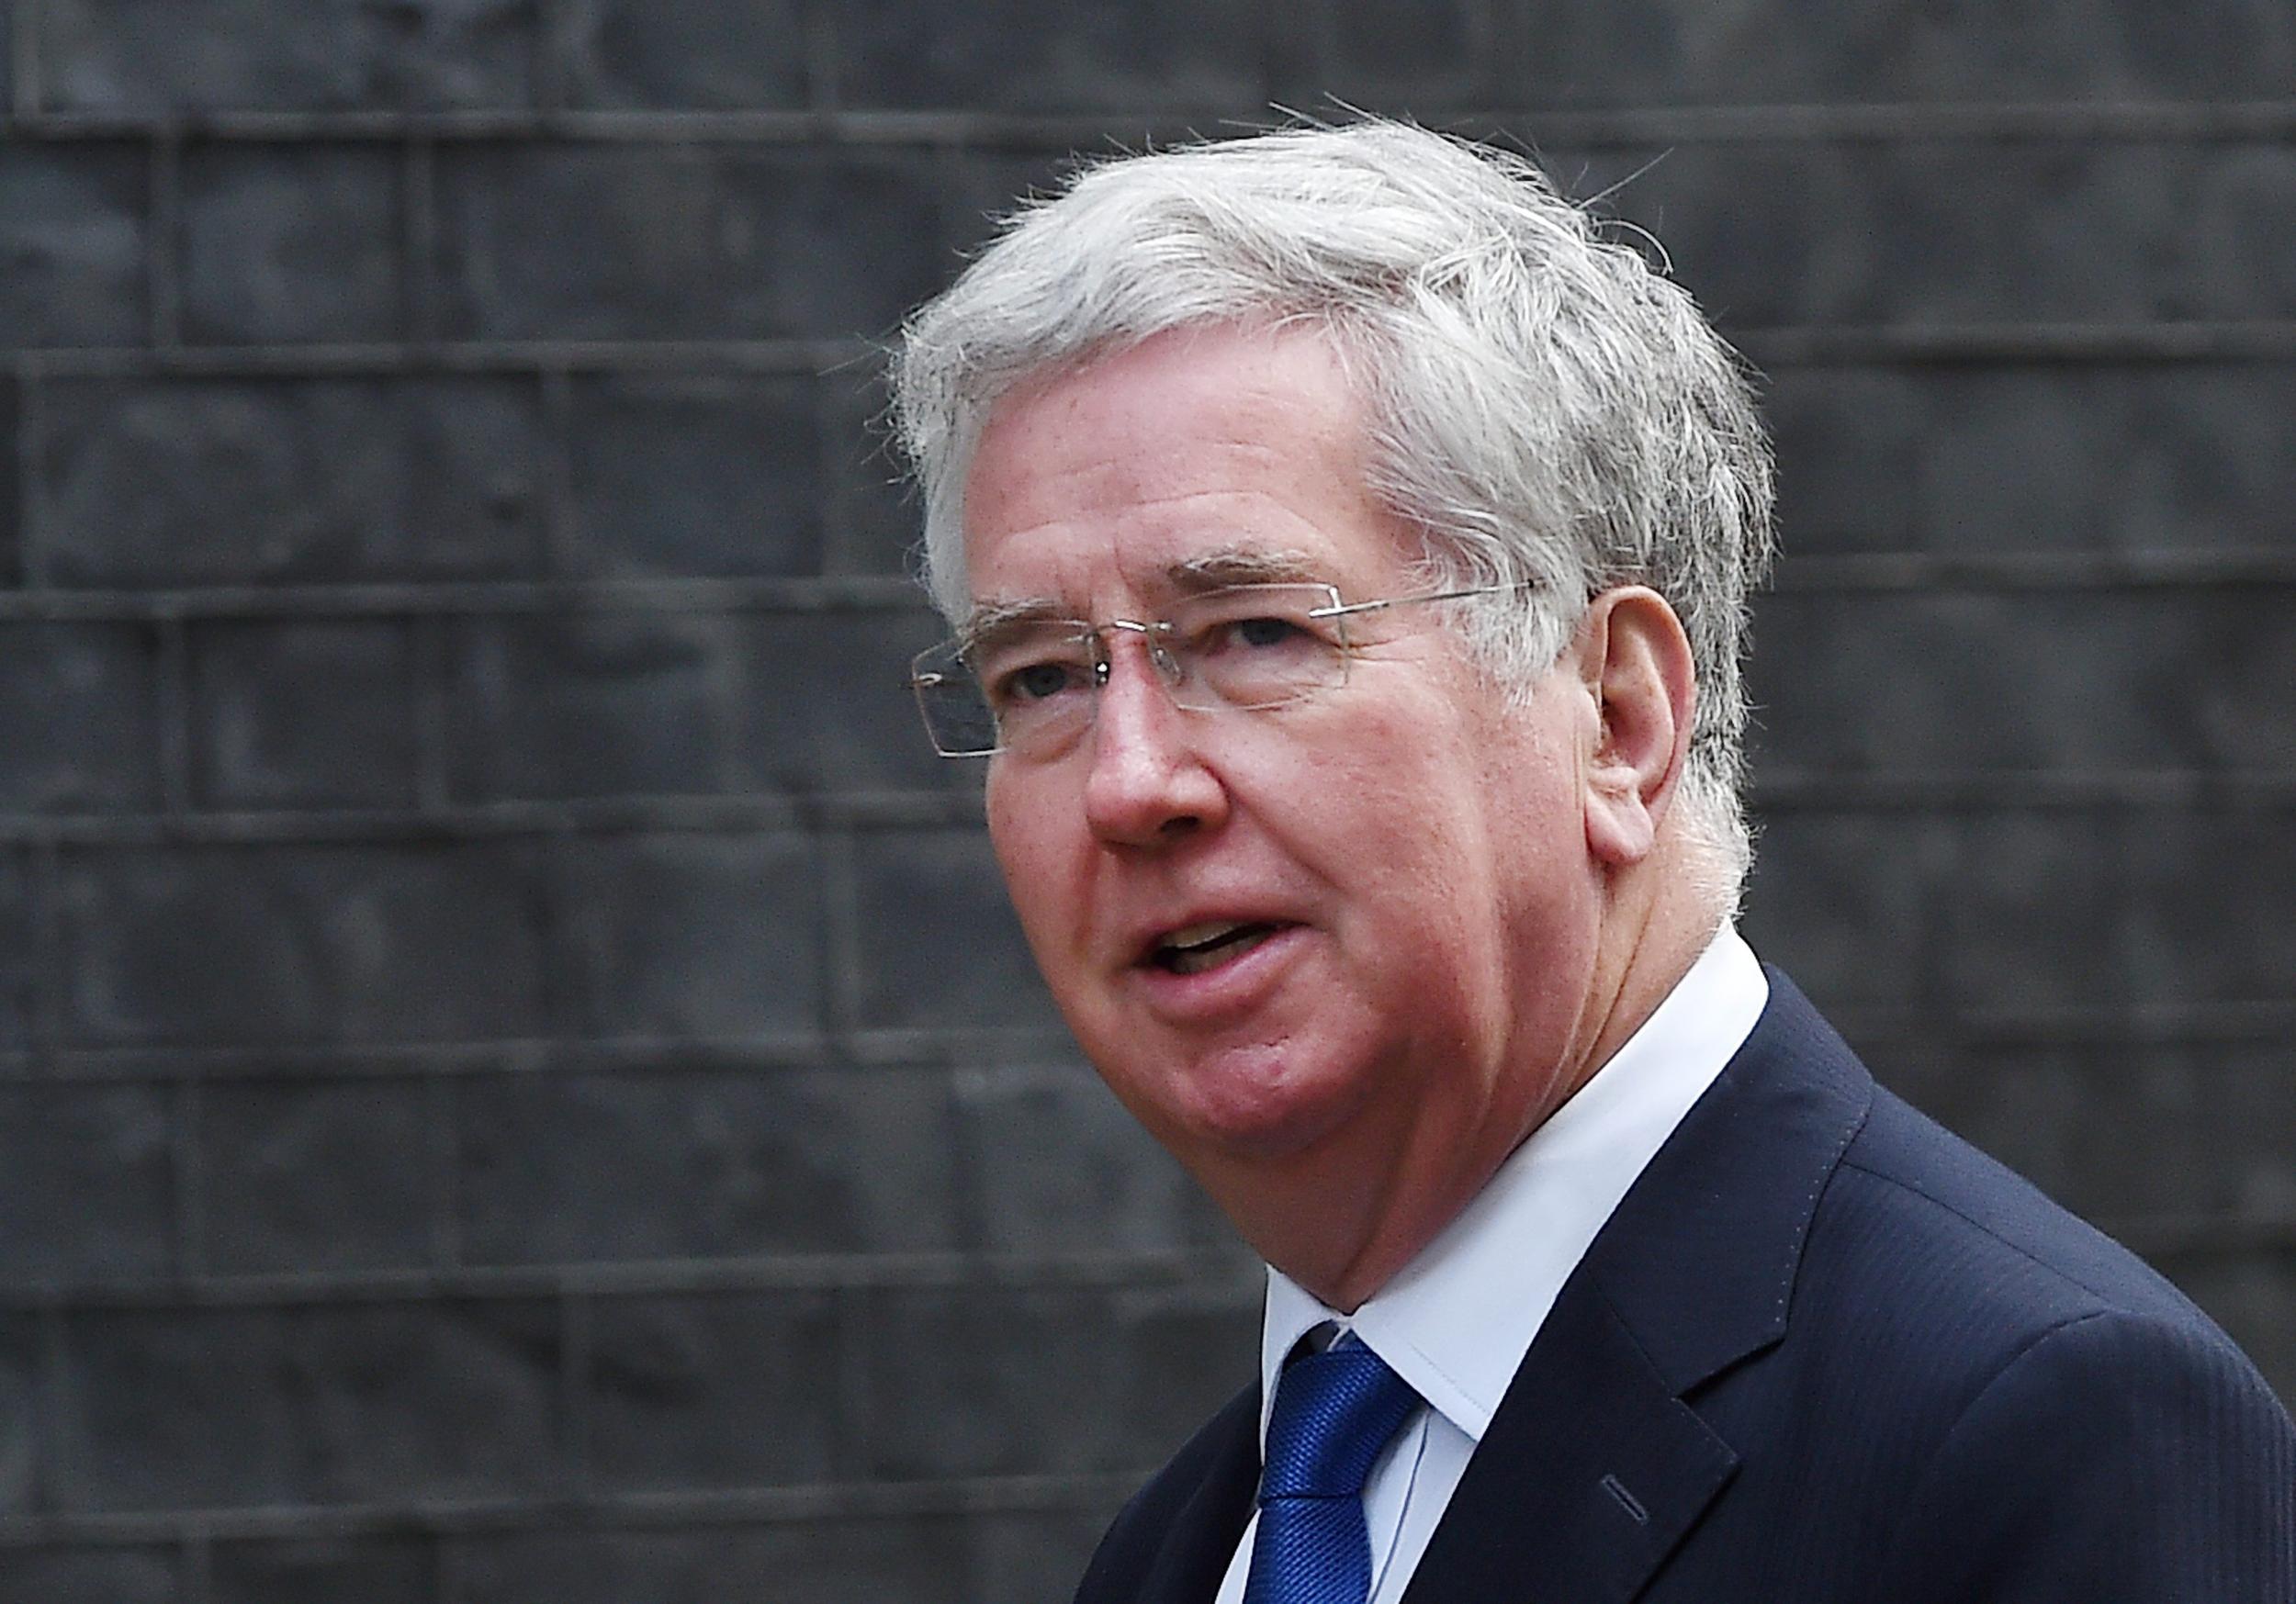 Michael Fallon made the controversial comments in a speech to Tory activists